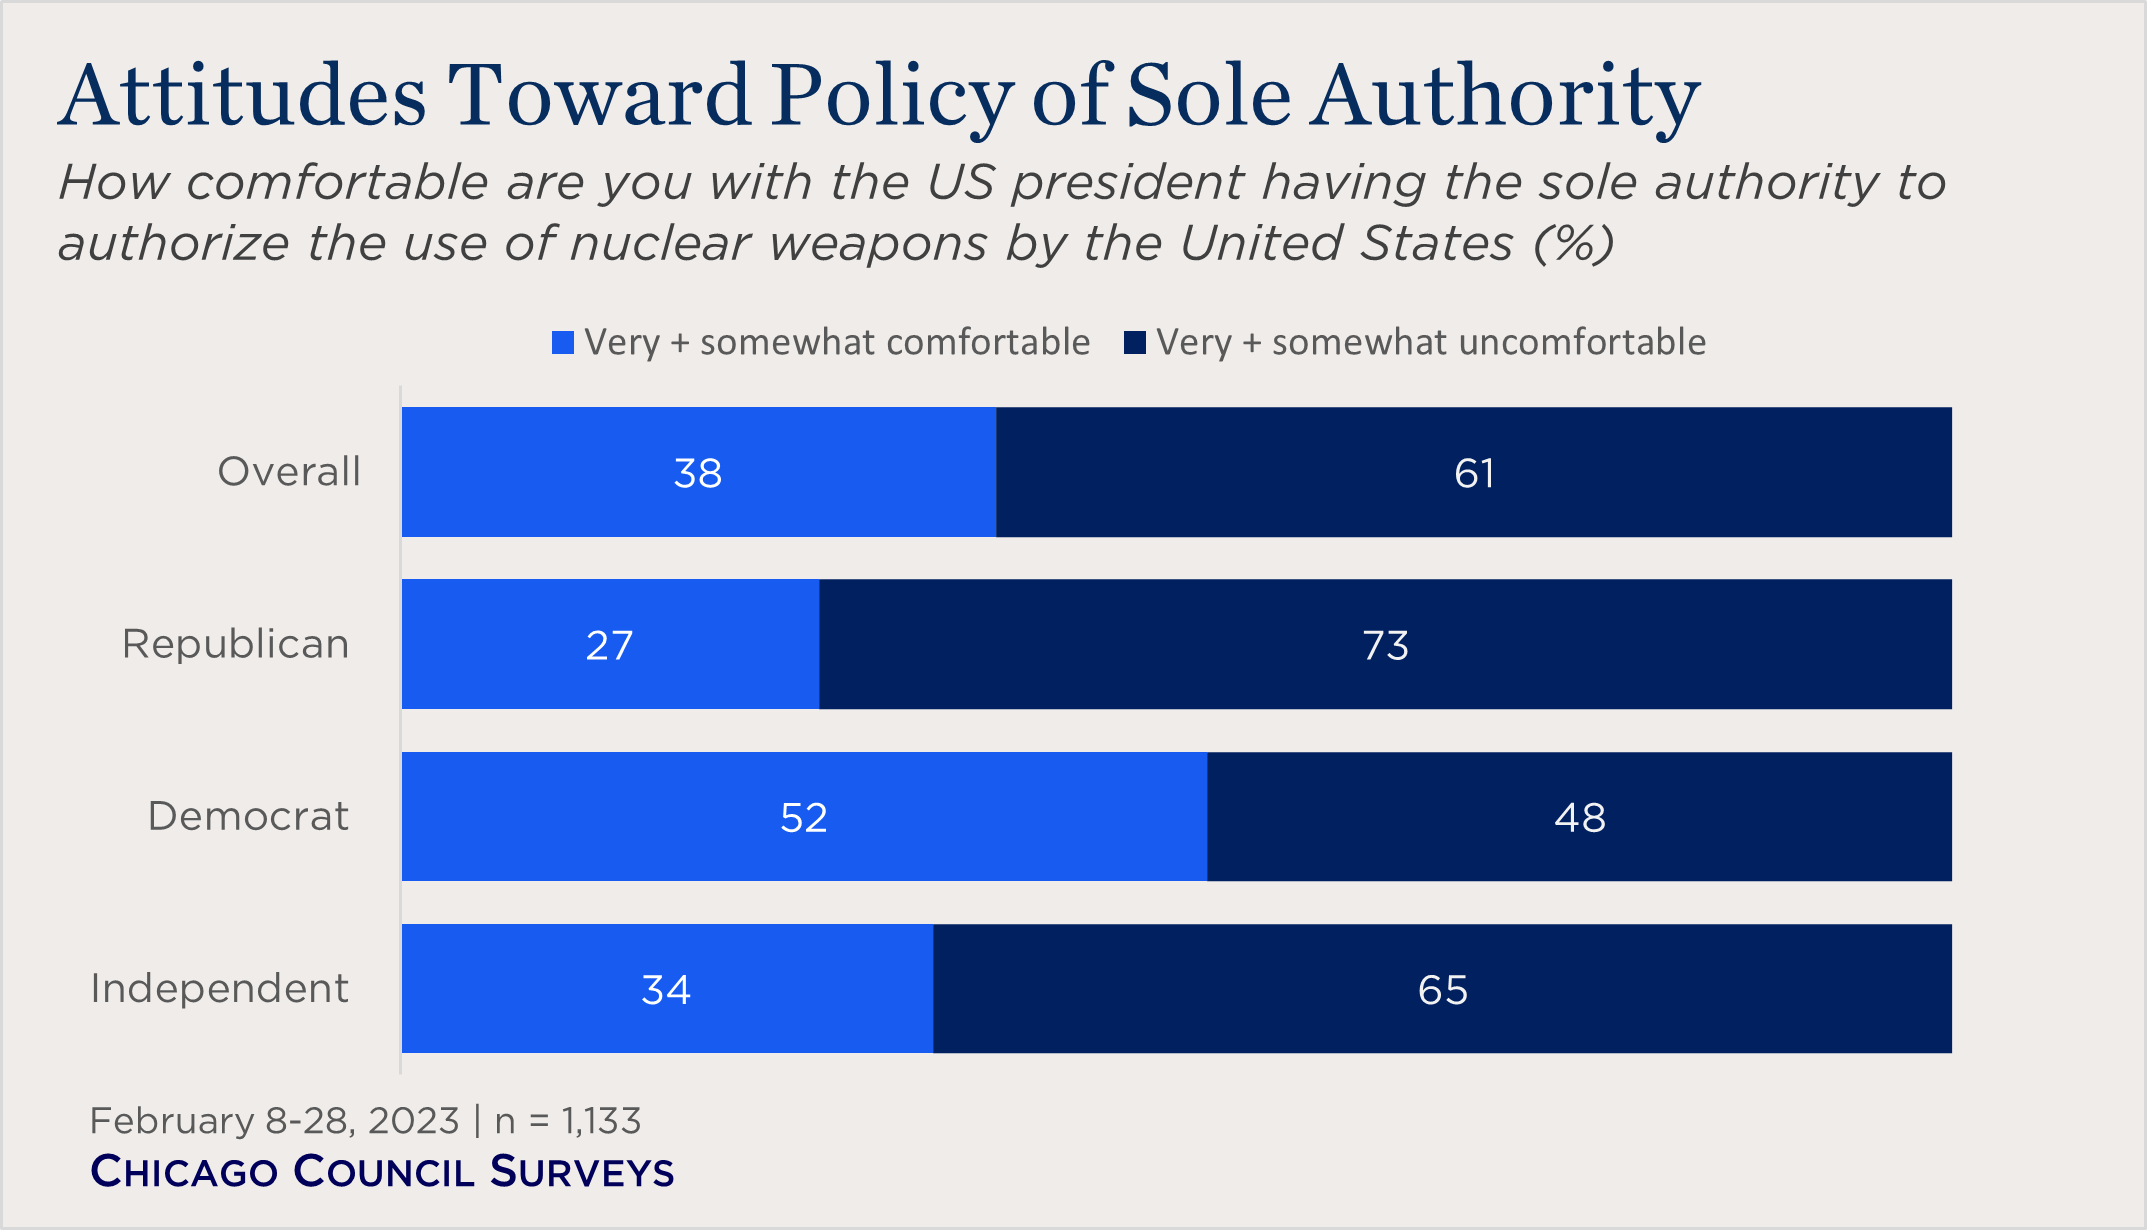 "bar chart showing attitudes toward policy of sole authority"